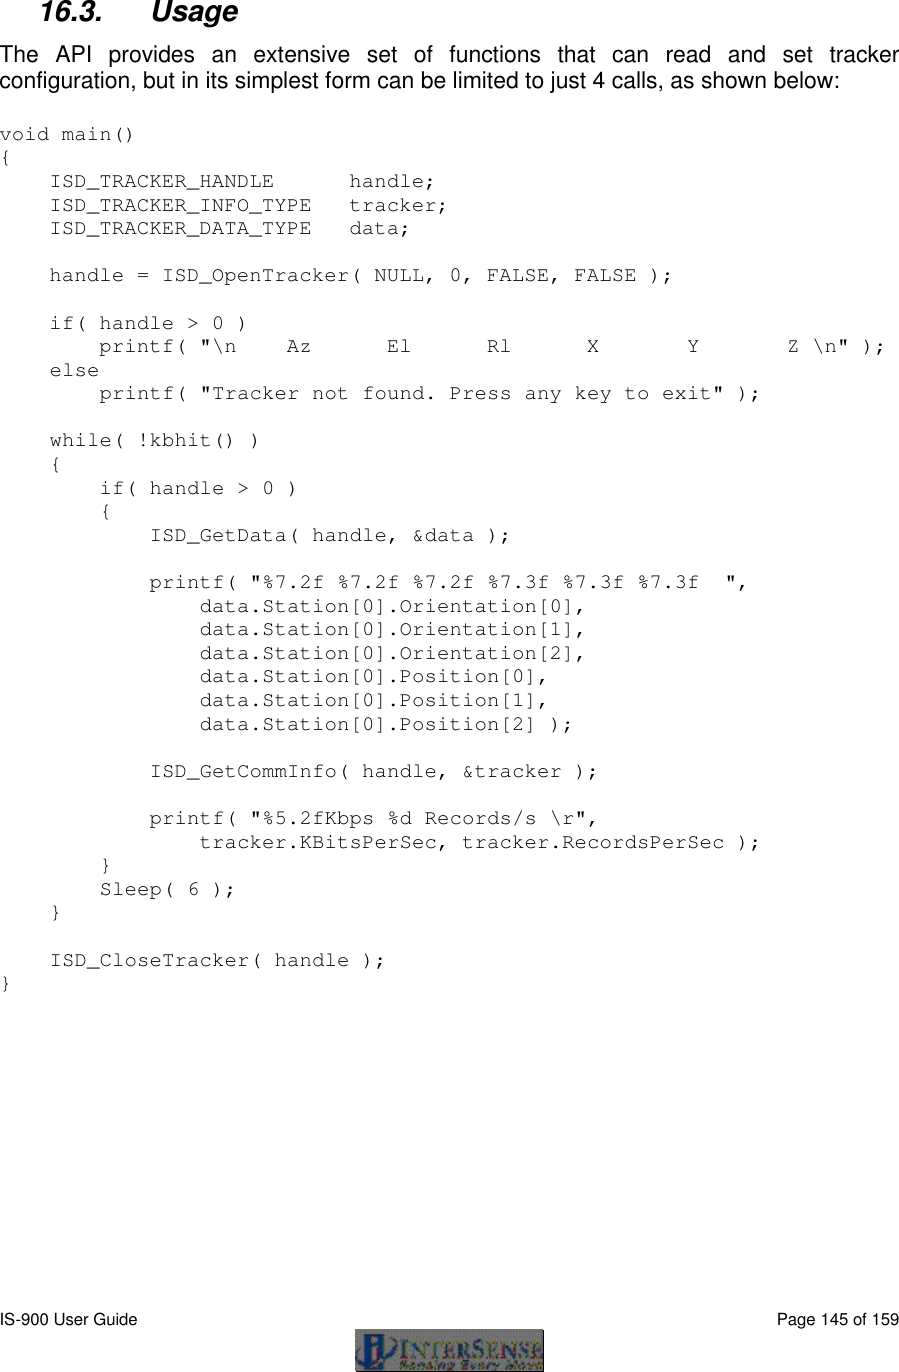  IS-900 User Guide                                                                                                                                          Page 145 of 159   16.3. Usage  The API provides an extensive set of functions that can read and set tracker configuration, but in its simplest form can be limited to just 4 calls, as shown below: void main() {     ISD_TRACKER_HANDLE      handle;     ISD_TRACKER_INFO_TYPE   tracker;     ISD_TRACKER_DATA_TYPE   data;      handle = ISD_OpenTracker( NULL, 0, FALSE, FALSE );       if( handle &gt; 0 )         printf( &quot;\n    Az      El      Rl      X       Y       Z \n&quot; );     else           printf( &quot;Tracker not found. Press any key to exit&quot; );      while( !kbhit() )     {         if( handle &gt; 0 )         {             ISD_GetData( handle, &amp;data );              printf( &quot;%7.2f %7.2f %7.2f %7.3f %7.3f %7.3f  &quot;,                  data.Station[0].Orientation[0],                  data.Station[0].Orientation[1],                  data.Station[0].Orientation[2],                 data.Station[0].Position[0],                  data.Station[0].Position[1],                  data.Station[0].Position[2] );              ISD_GetCommInfo( handle, &amp;tracker );              printf( &quot;%5.2fKbps %d Records/s \r&quot;,                  tracker.KBitsPerSec, tracker.RecordsPerSec );         }         Sleep( 6 );     }      ISD_CloseTracker( handle ); } 